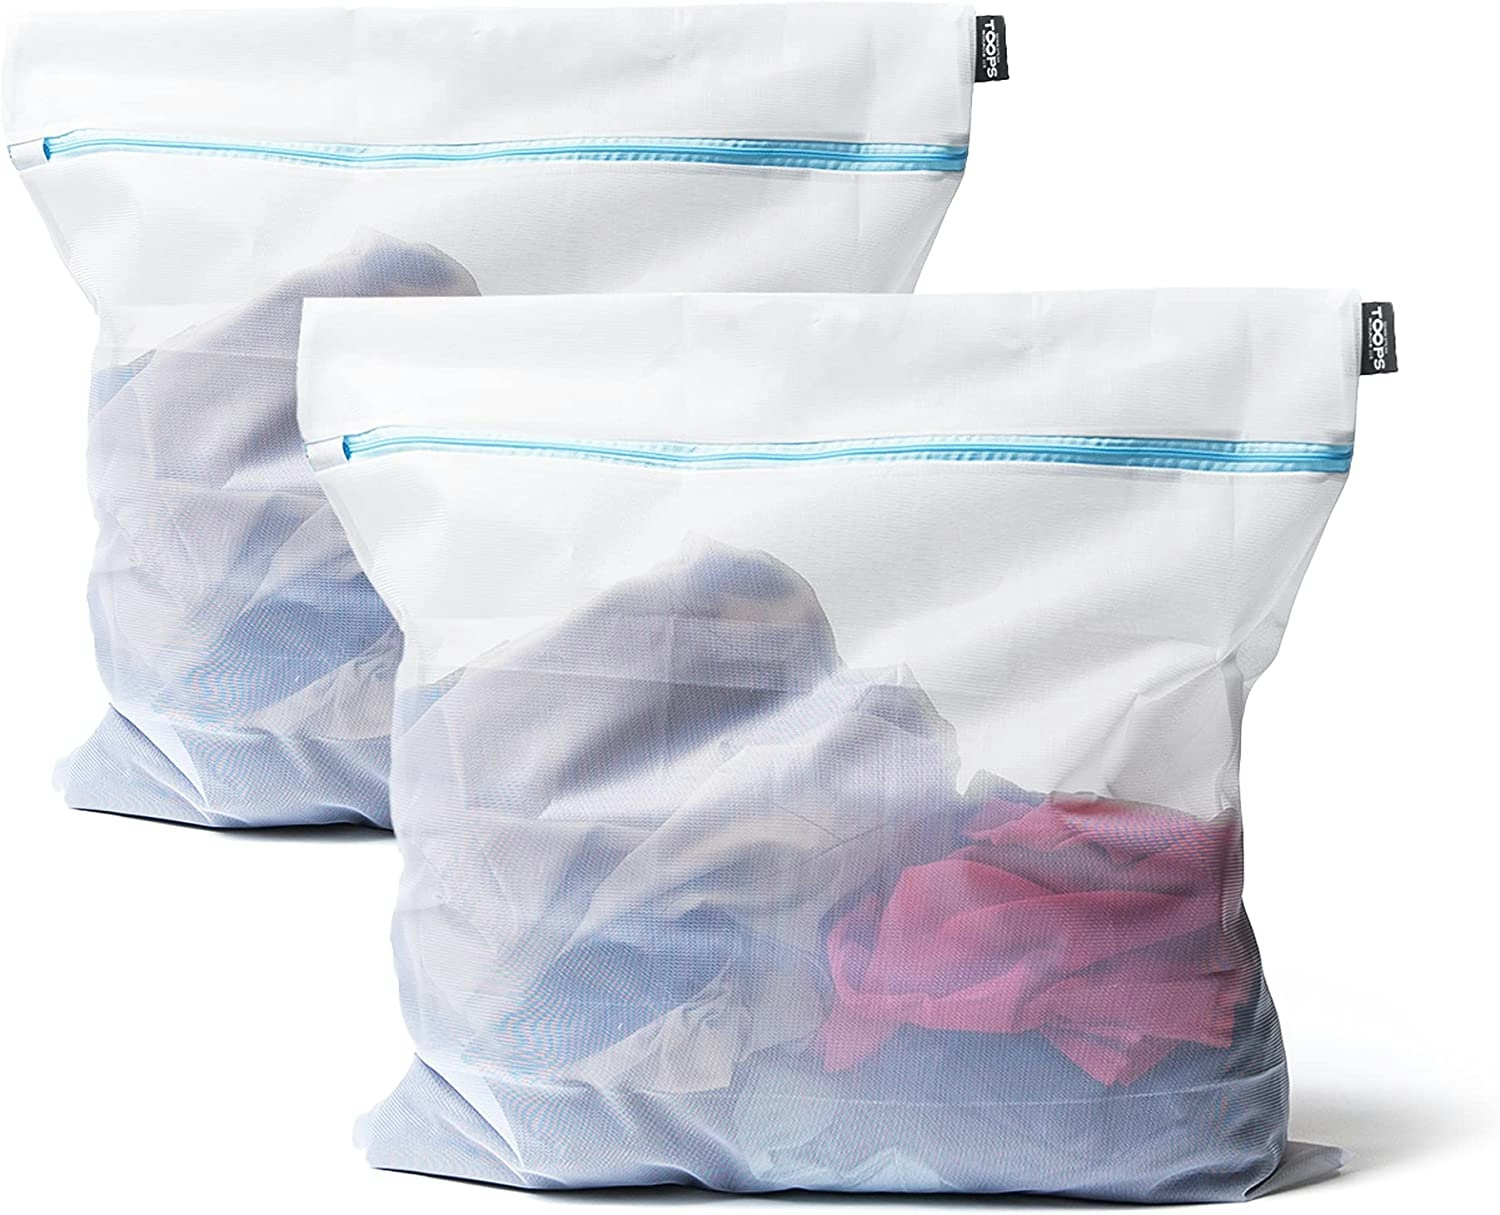 Premium Fine Mesh Laundry Bags for Washing Bras, Lingerie and